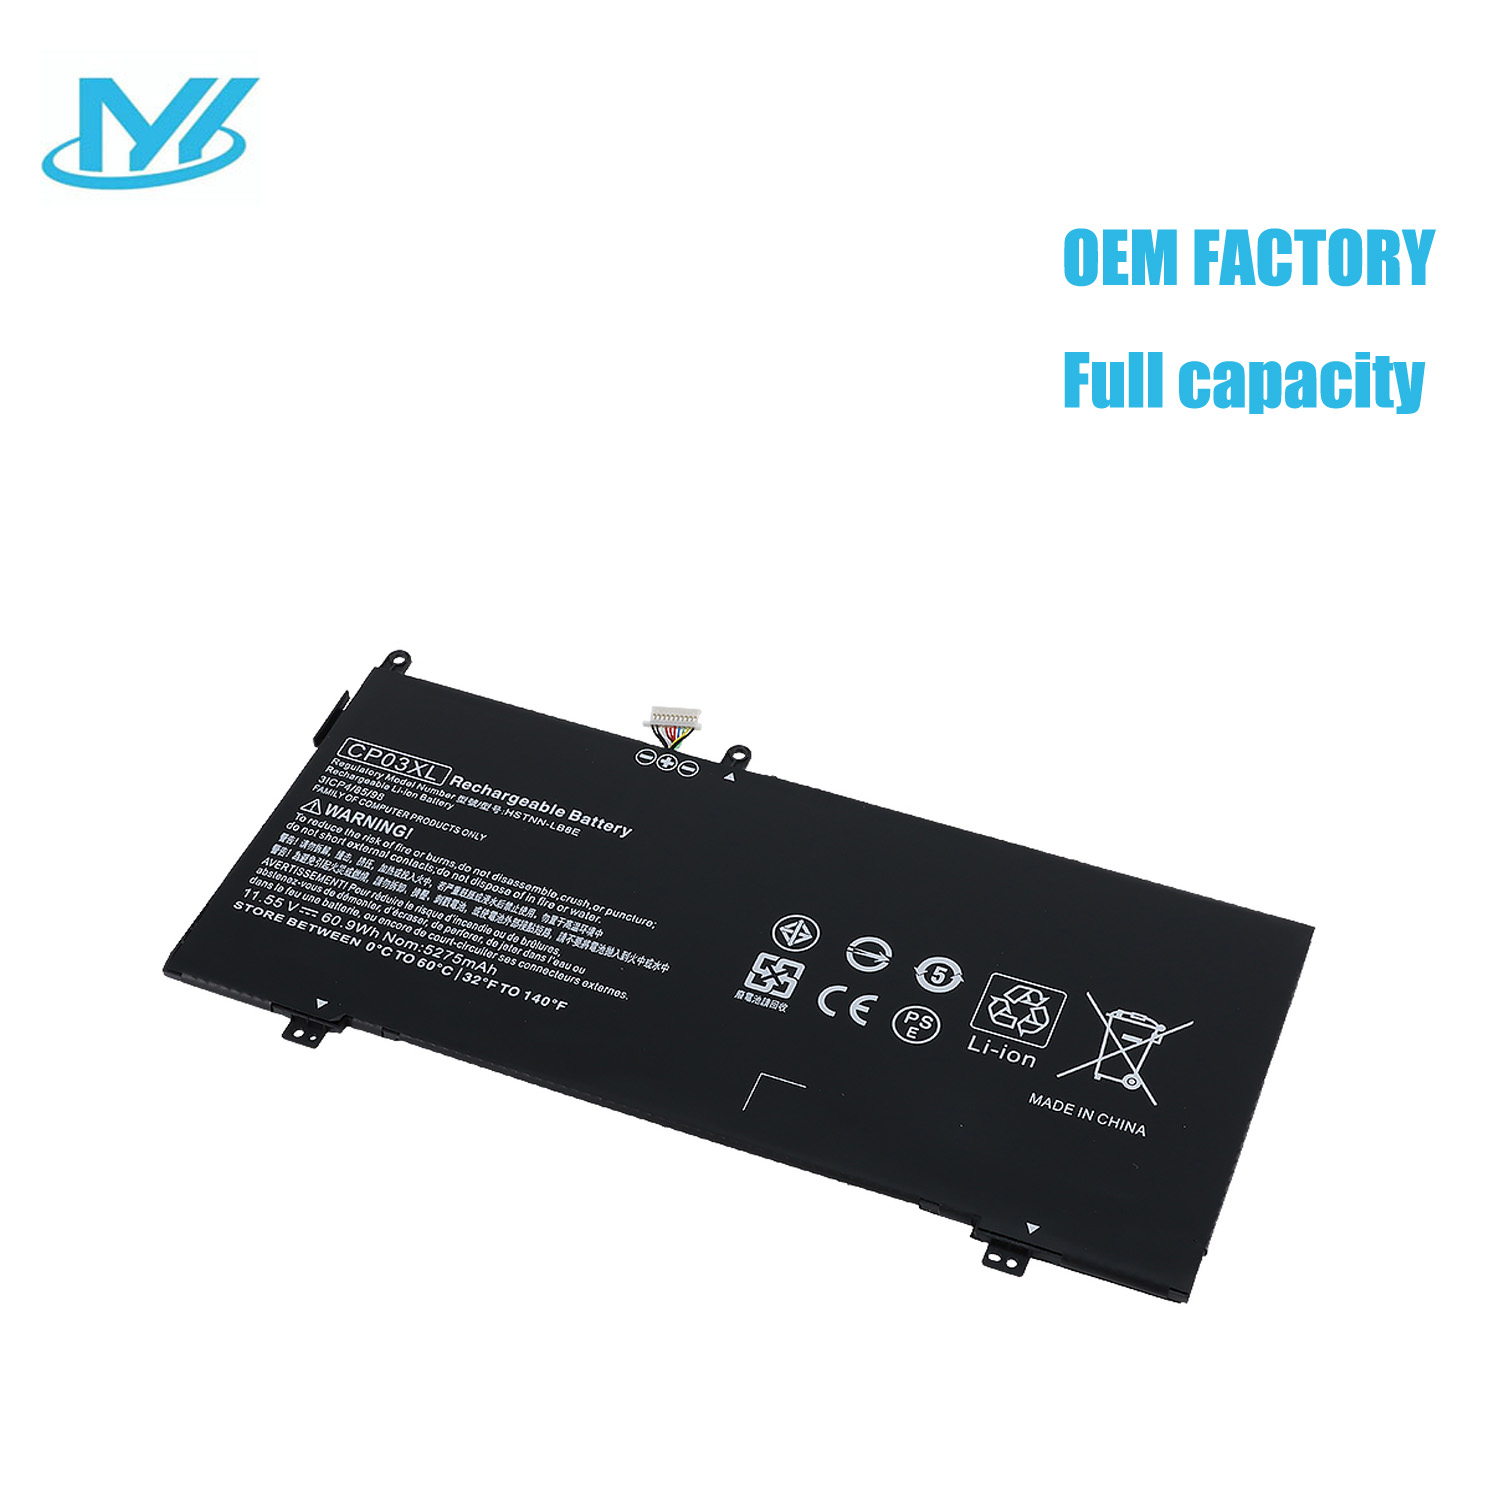 CP03XL rechargeable lithium ion Notebook battery Laptop battery Spectre 13-ae006no x360 13-ae000 13-ae001ng 11.55V 60.9WH